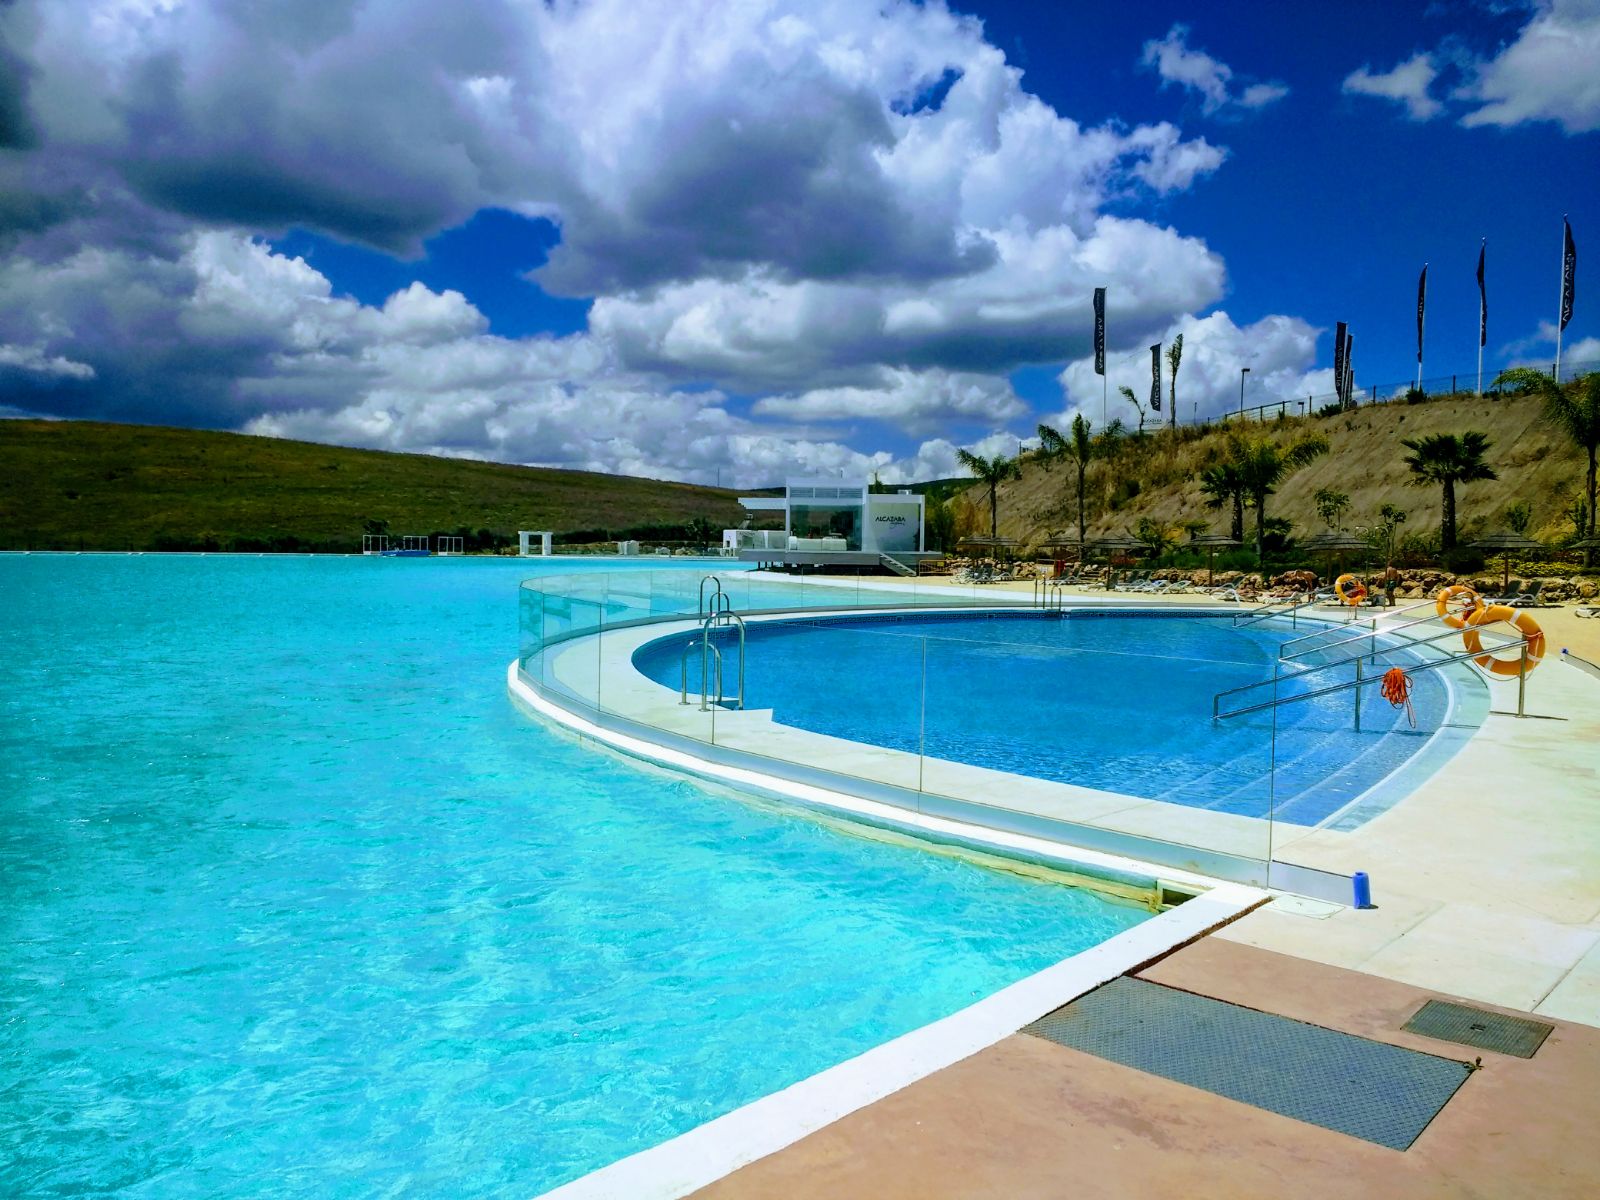 Image shows large pool in crystal lagoon